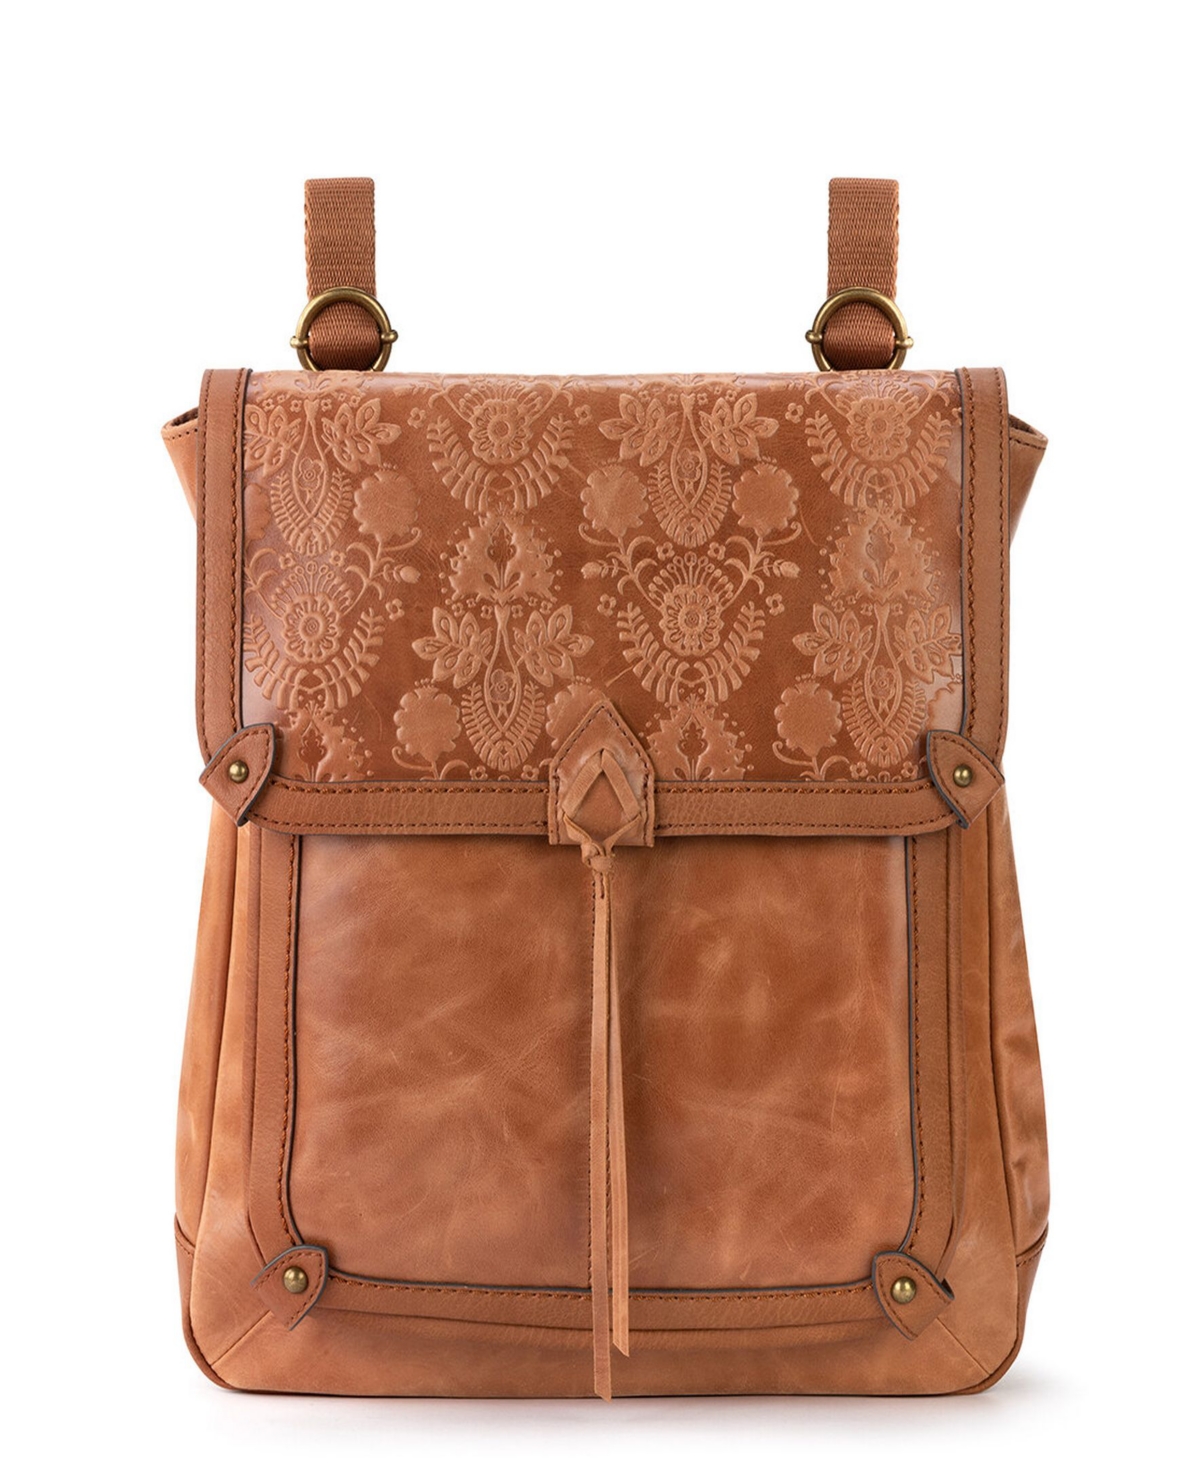 The Sak Women's Ventura Leather Convertible Backpack In Tobacco Floral Emboss